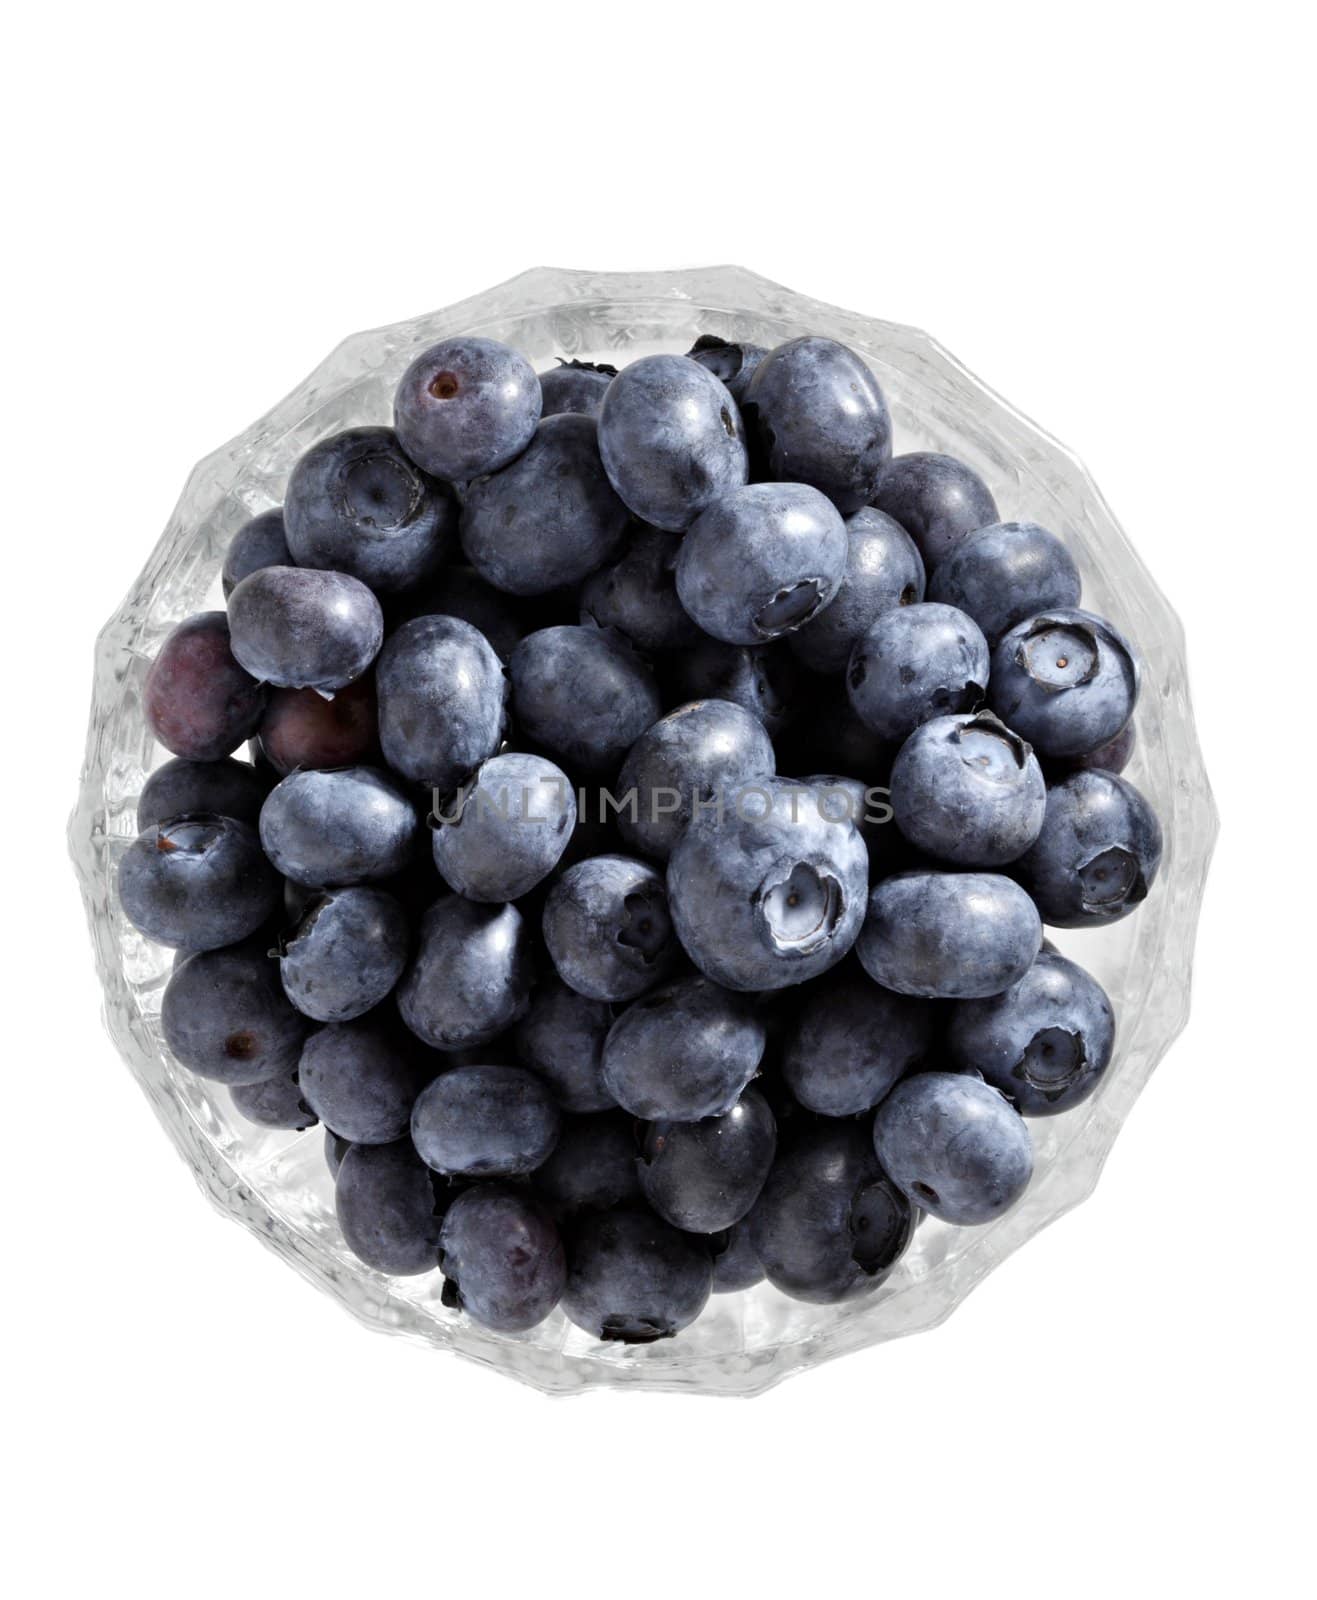 fresh blueberries in transparent bowl, isolated on white